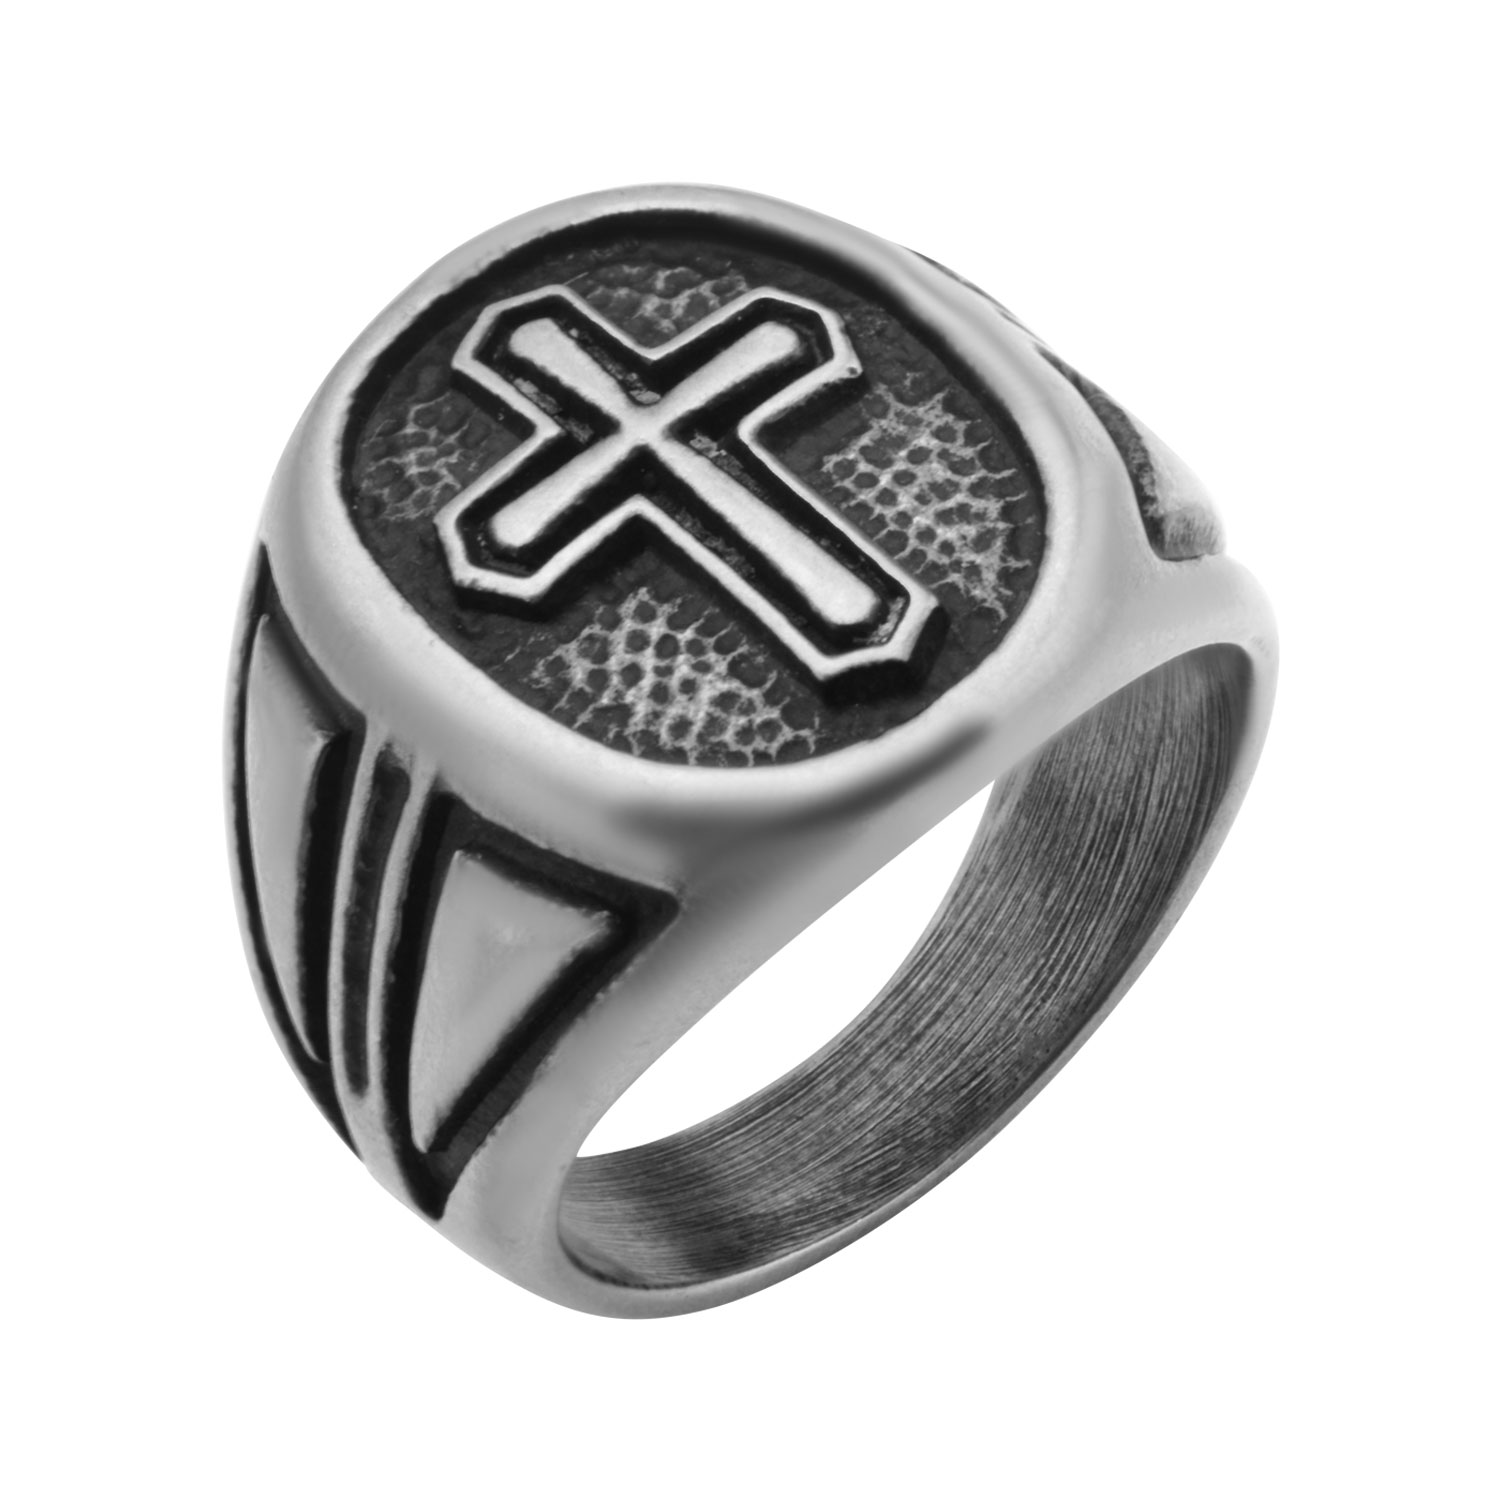 Antique Stainless Steel Cross Ring Image 3 Enchanted Jewelry Plainfield, CT